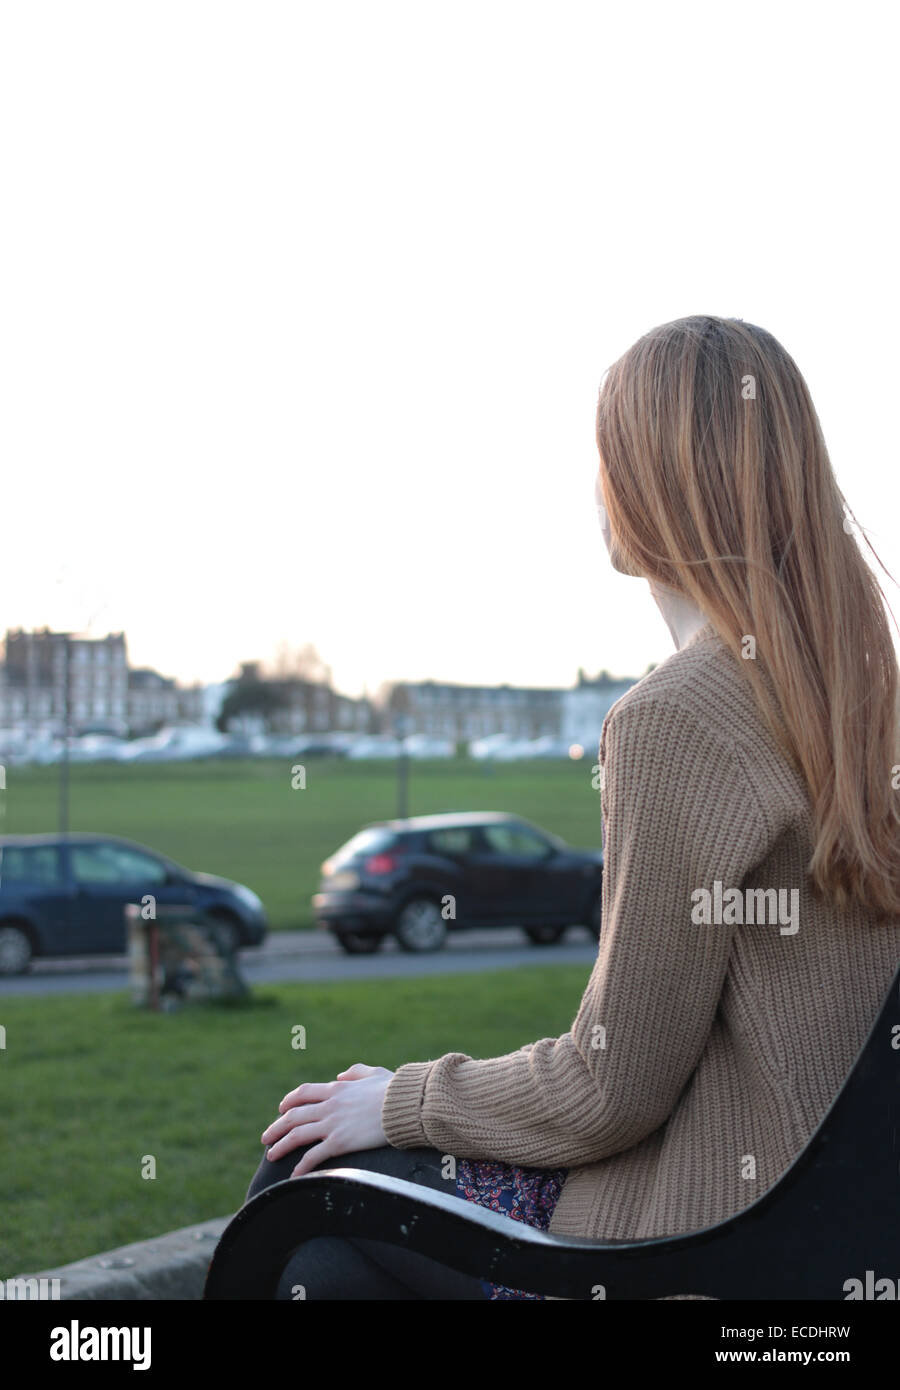 Rear view shot of a young woman sitting on a bench, looking into the distance in a park with cars parked. Stock Photo